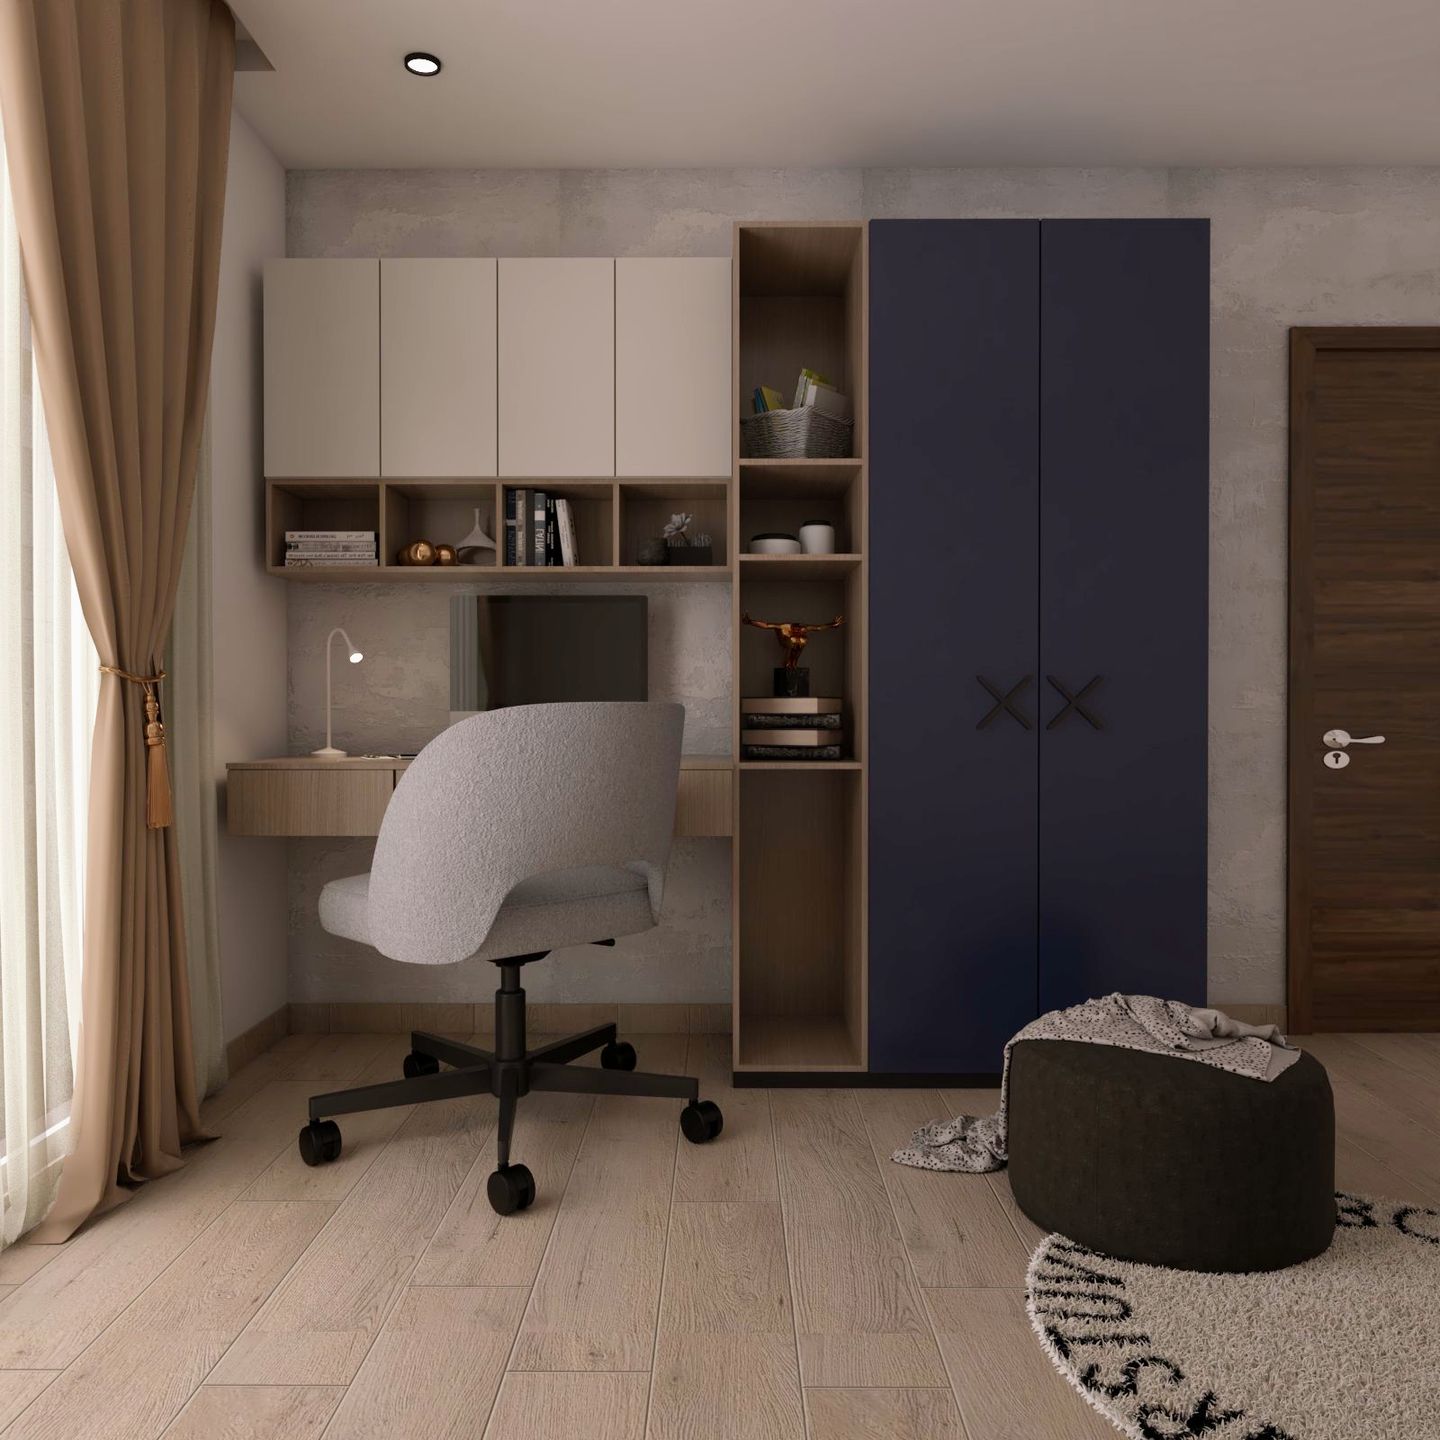 Wall-Mounted Contemporary Wood And White Home Office Design With Wave Blue Wardrobe And Grey Swivel Chair - Livspace